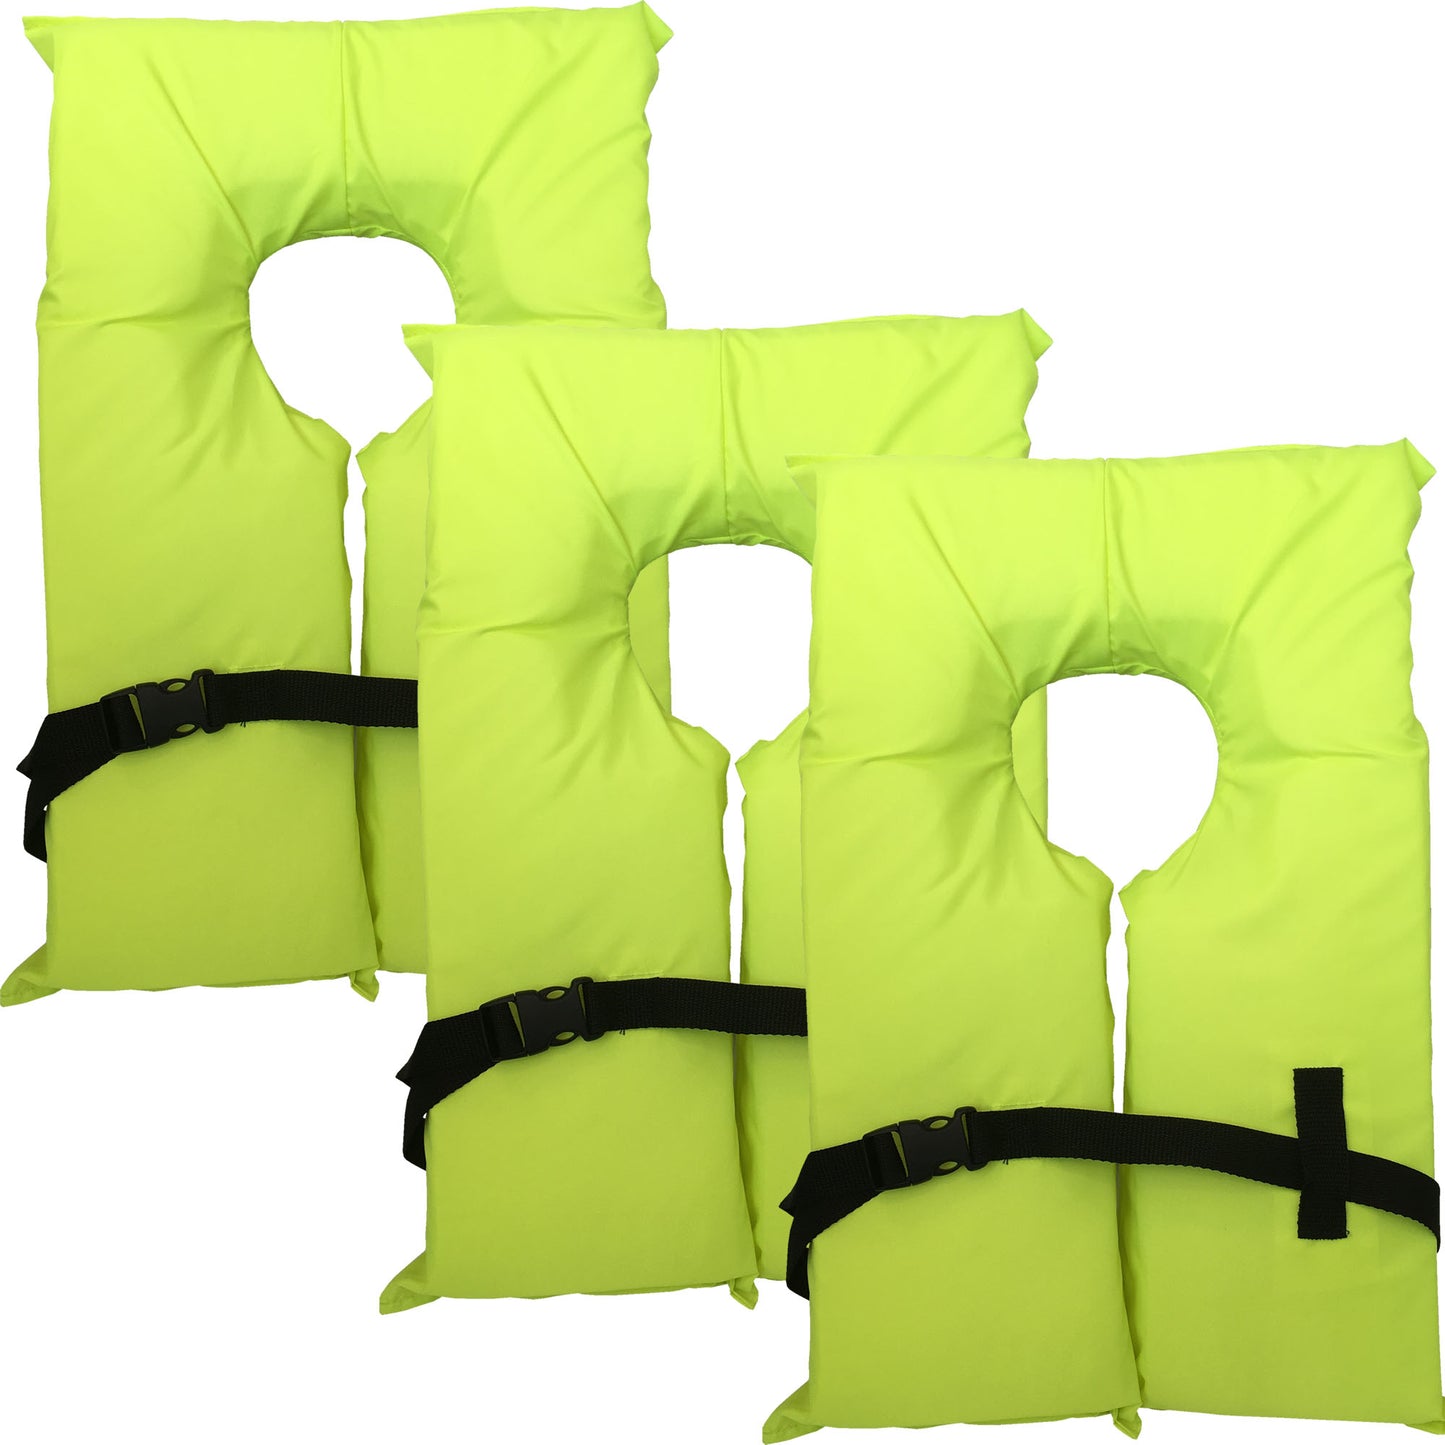 Hardcore Coast Guard approved life jackets for adults.  High visibility neon yellow color Type II keyhole life vest in classic May West style. Compliance life vests and flotation device (3 pack)